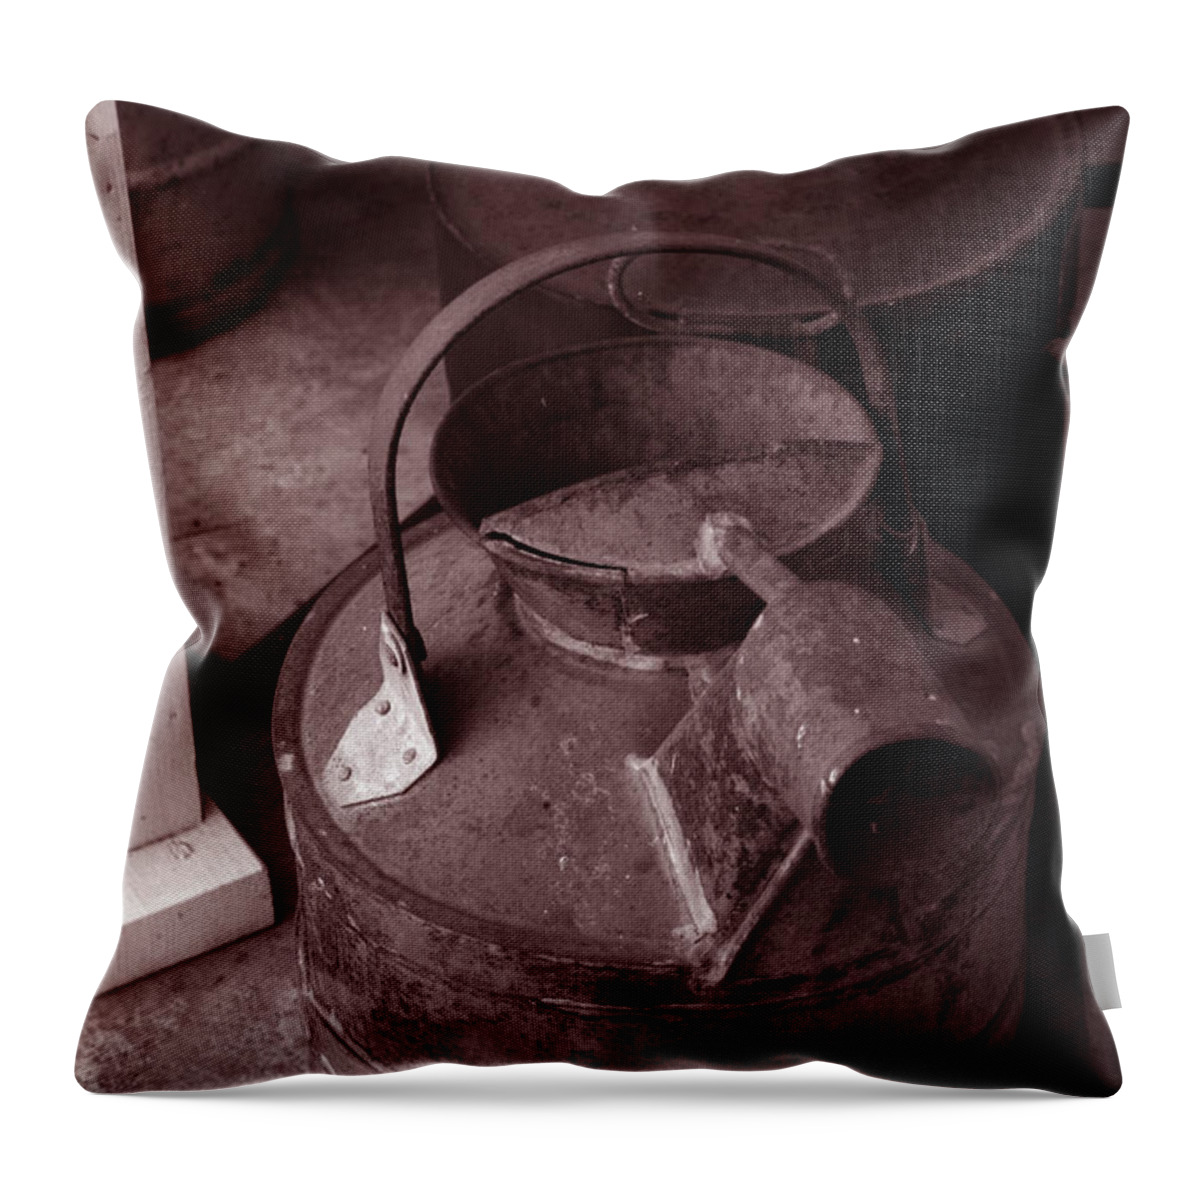 Vintage Photographs Throw Pillow featuring the photograph Vintage Sepia Galvanized Container by Lesa Fine